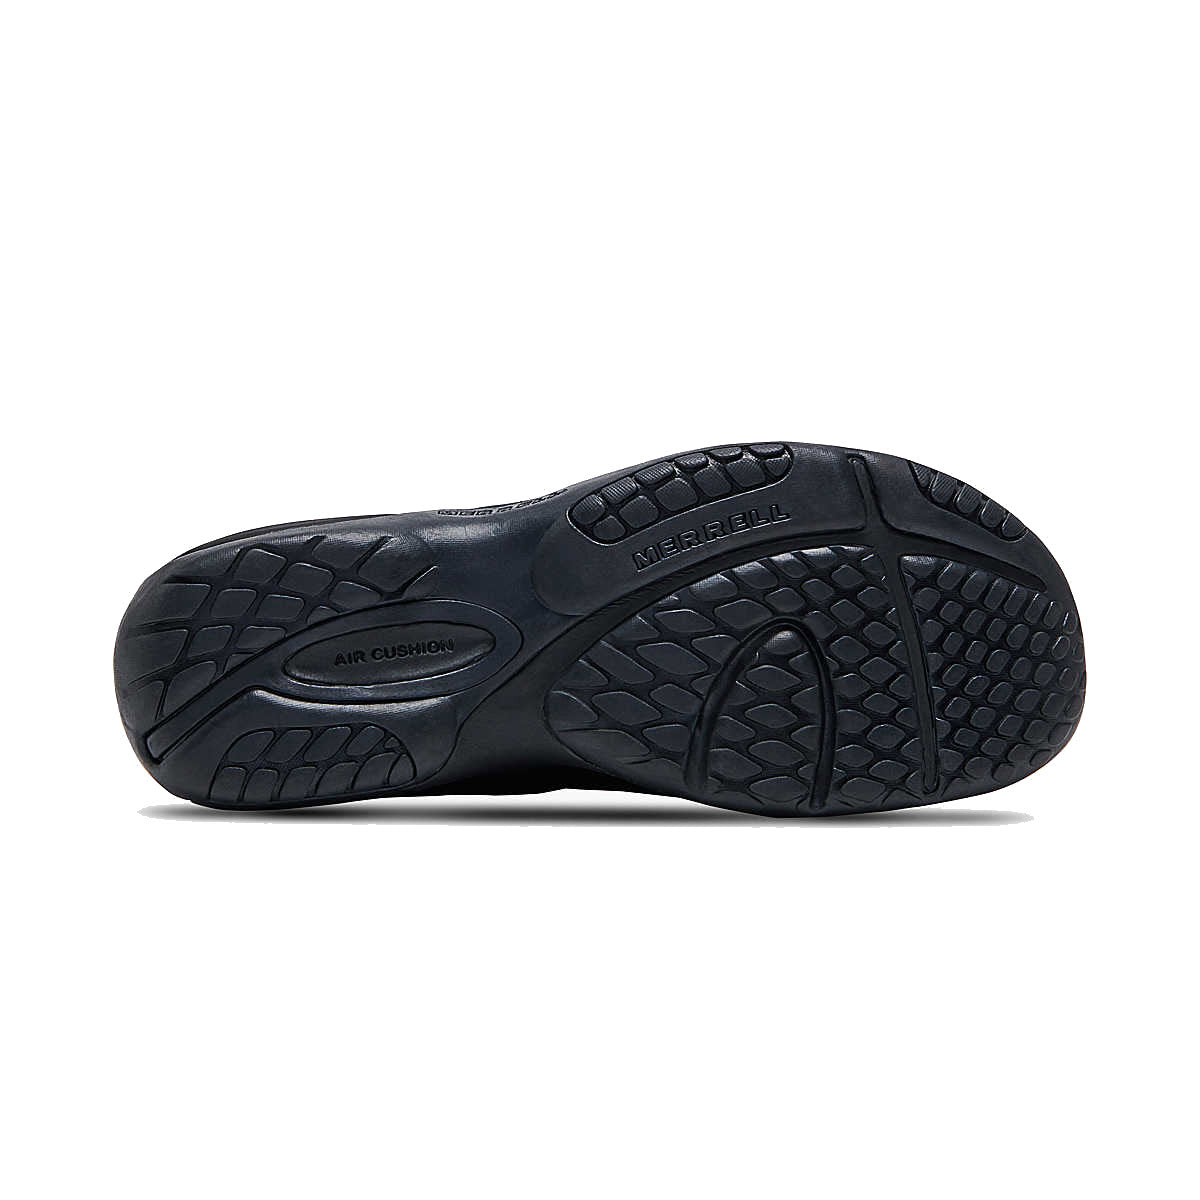 Bottom view of a black Merrell Encore Gust 2 shoe showing the durable outsole tread pattern and &quot;air cushion&quot; label on the sole.